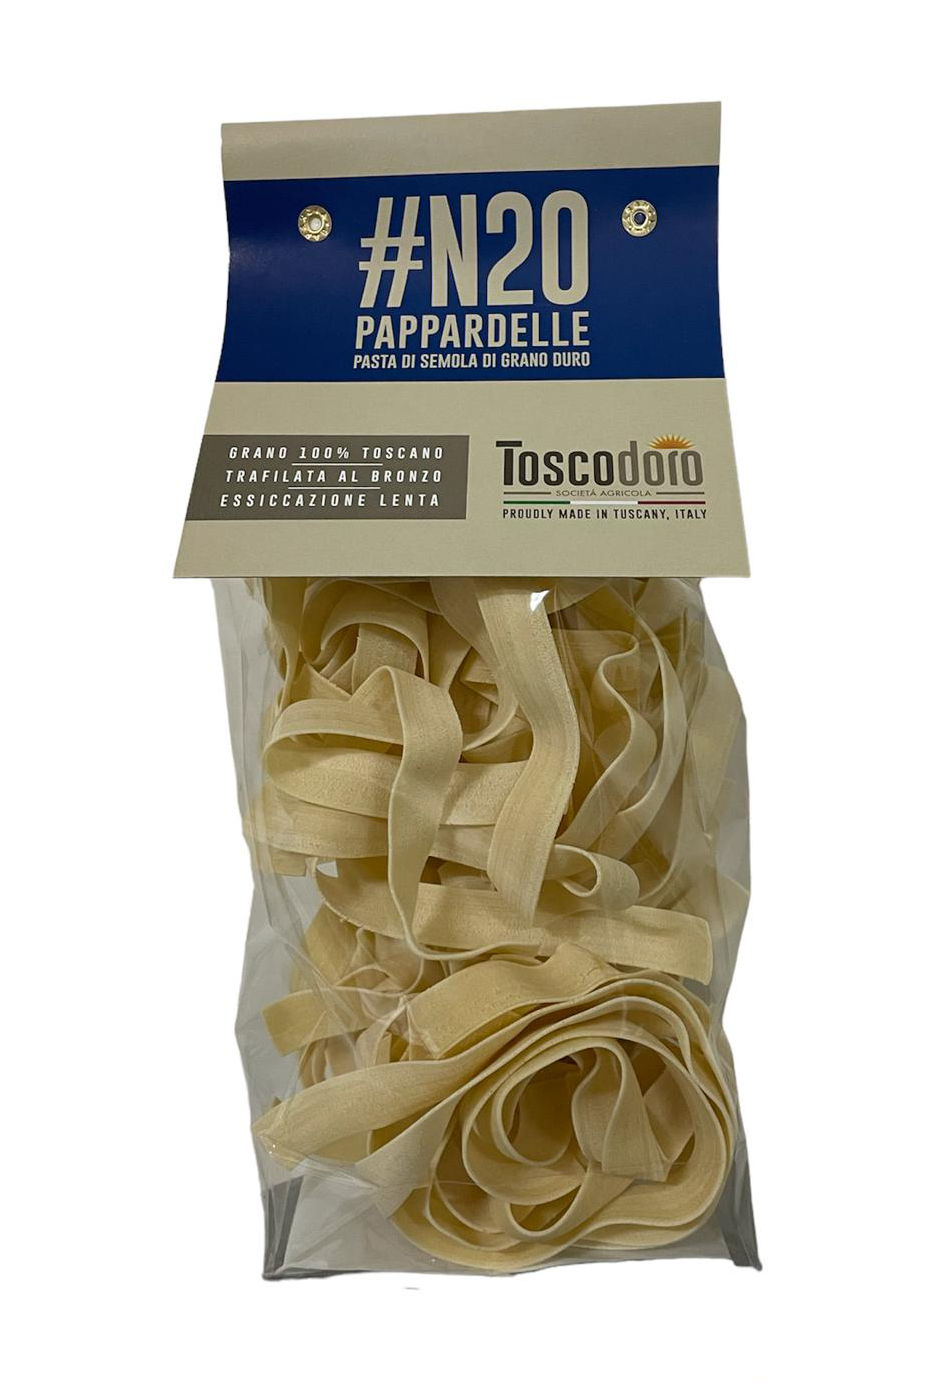 Pappardelle #N20